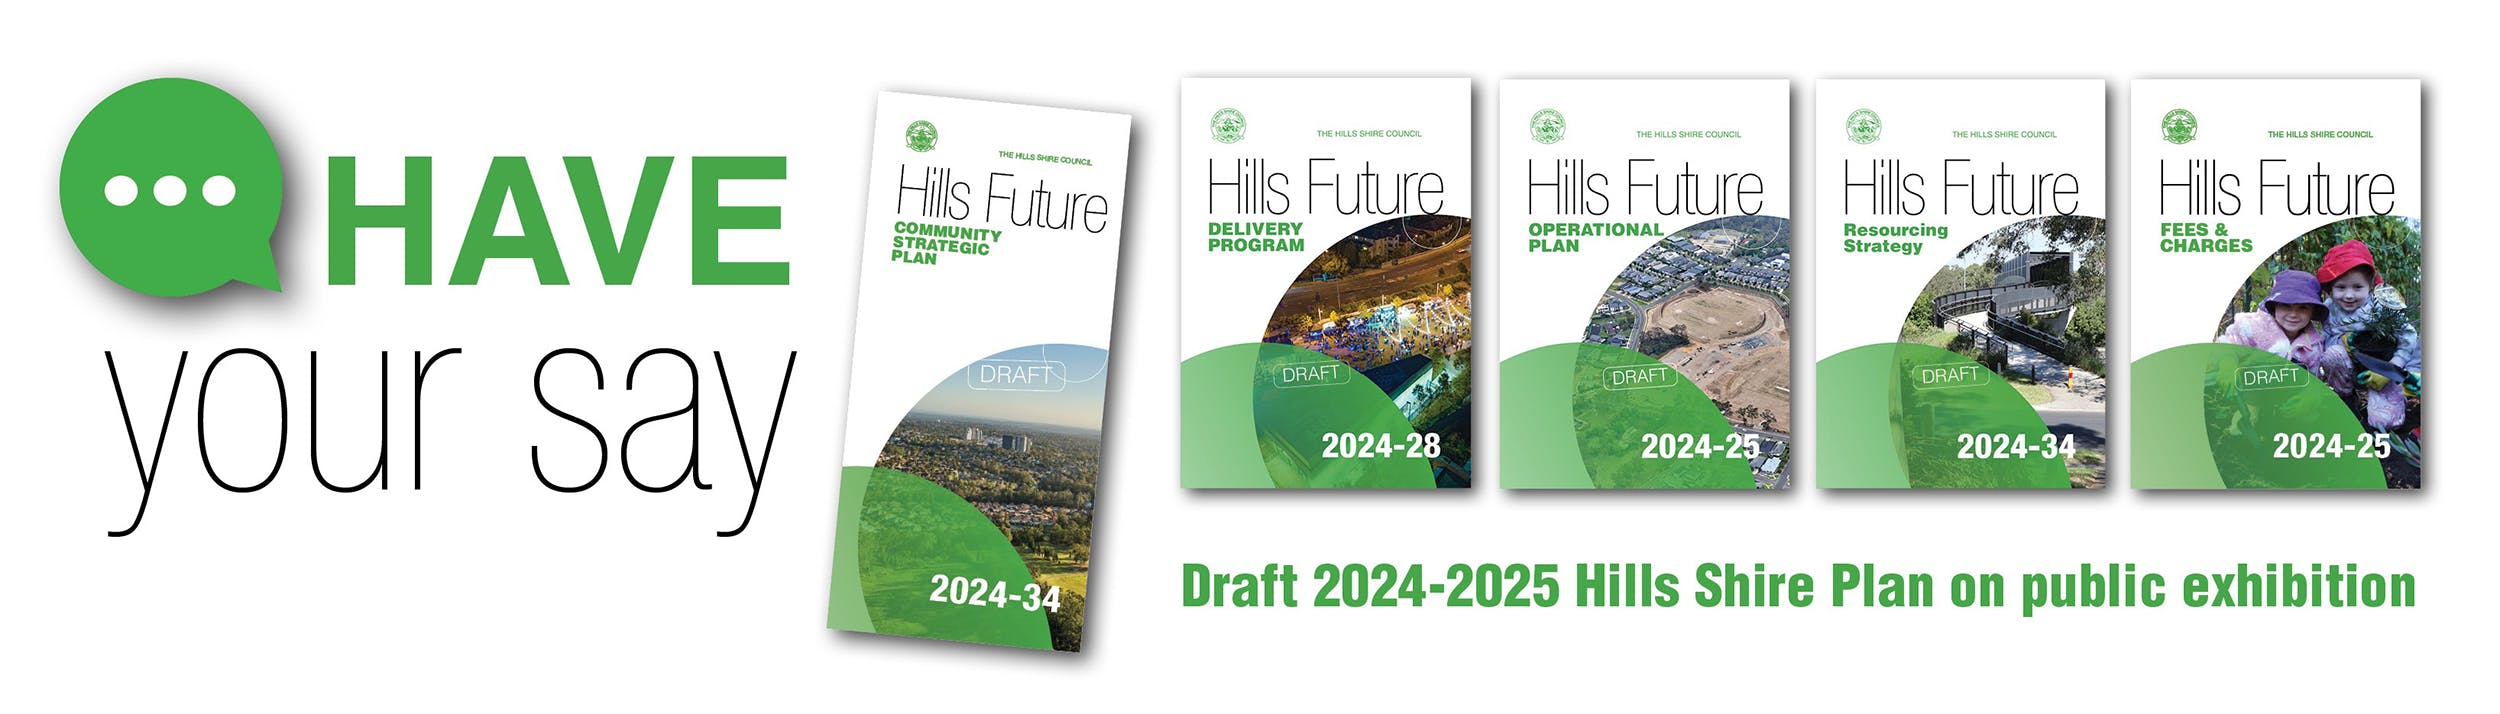 Have Your Say Banner for Draft 2024-25 Hills Shire Plan showing all 5 key documents on exhibition